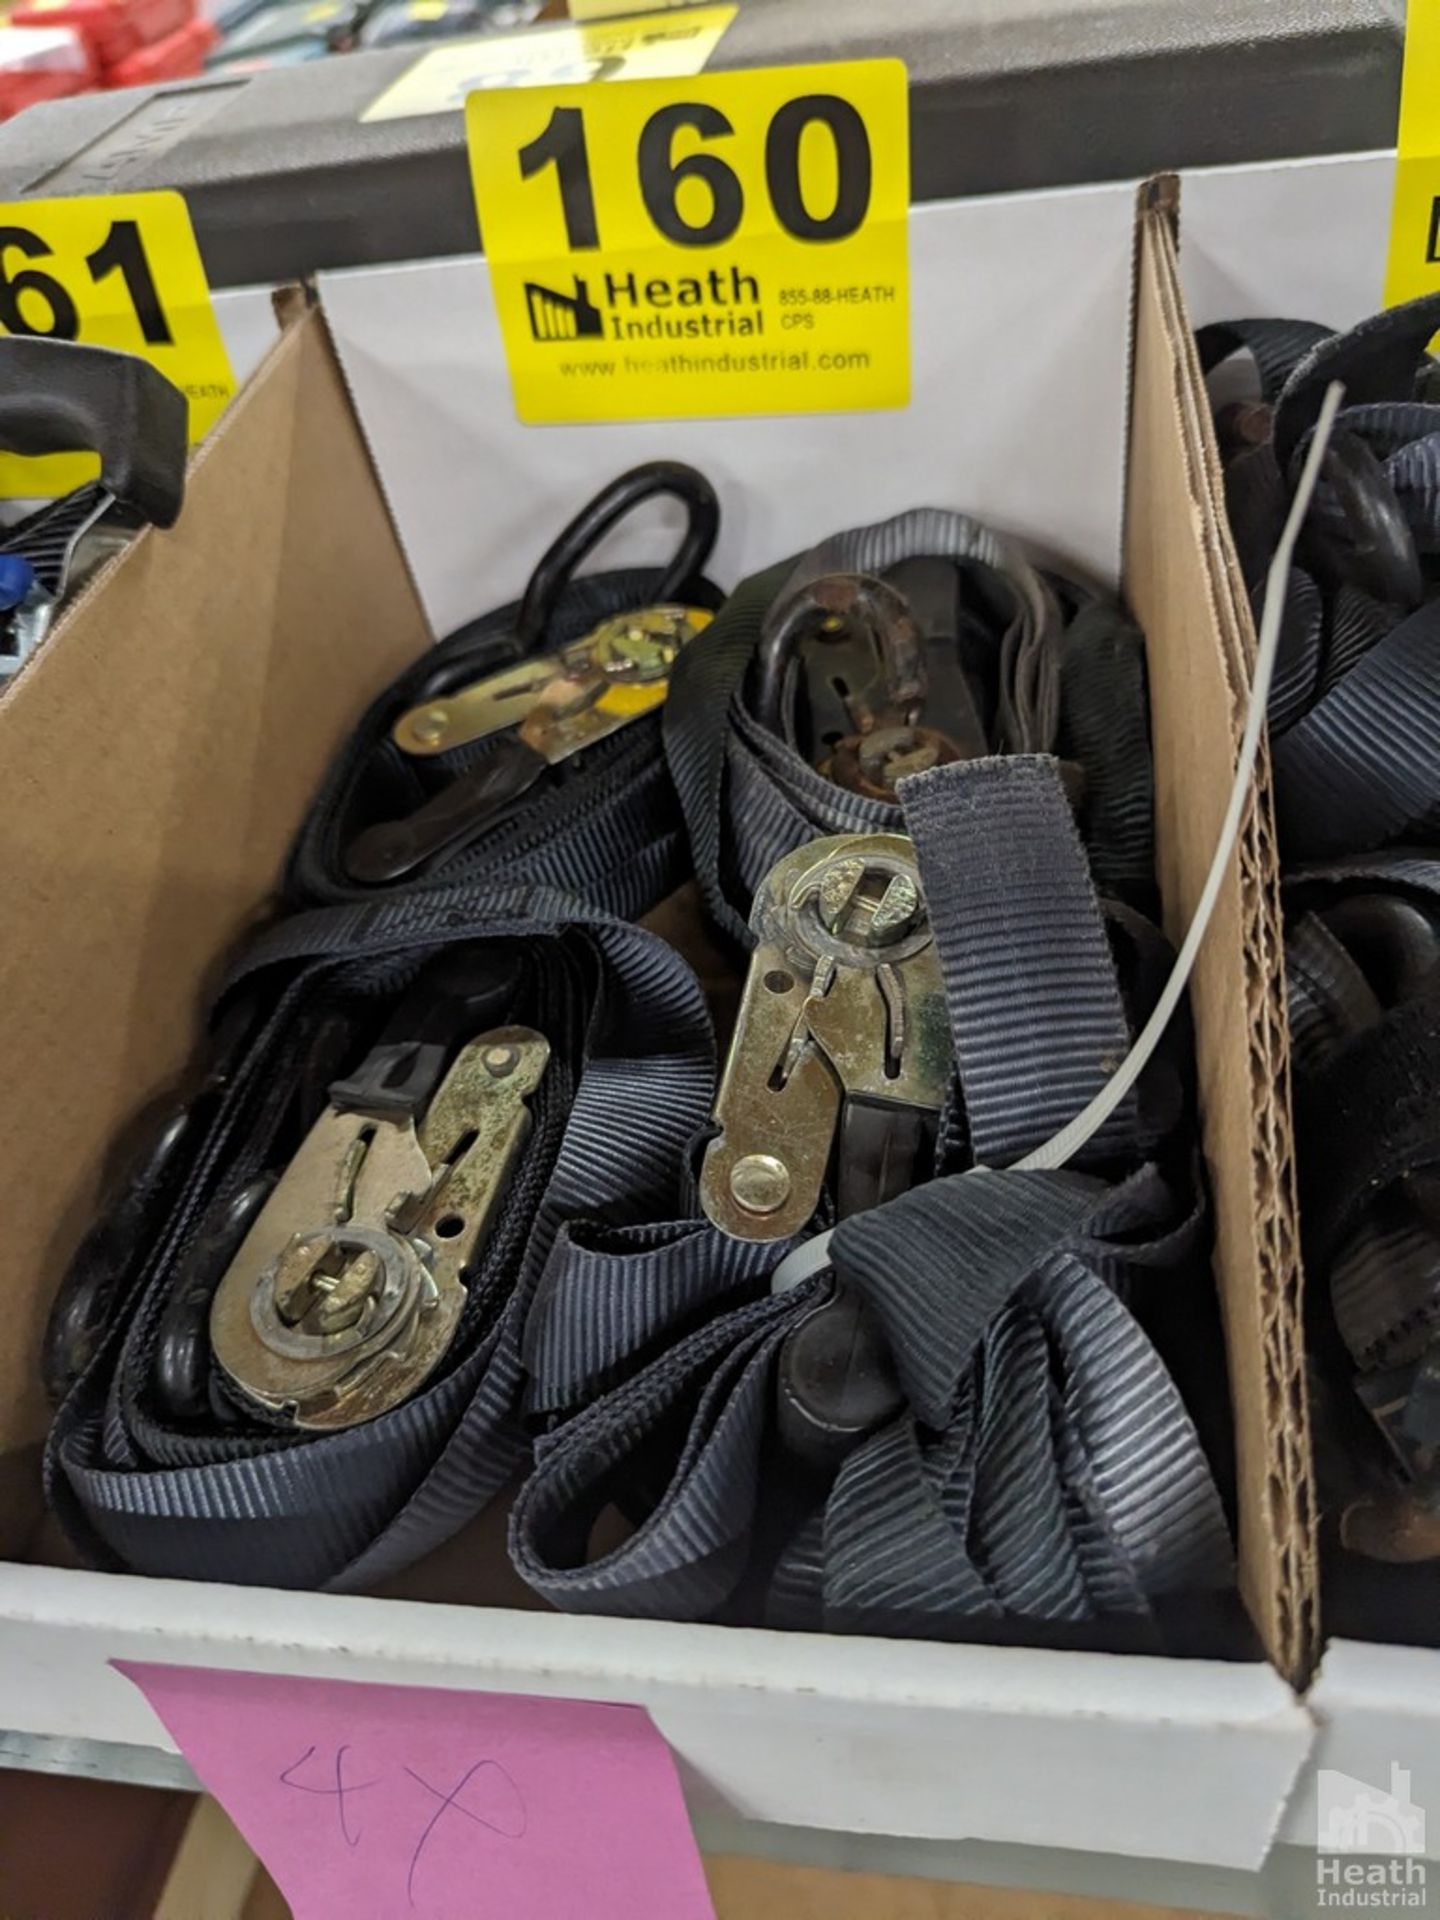 ASSORTED RATCHET TIE DOWNS IN BOX